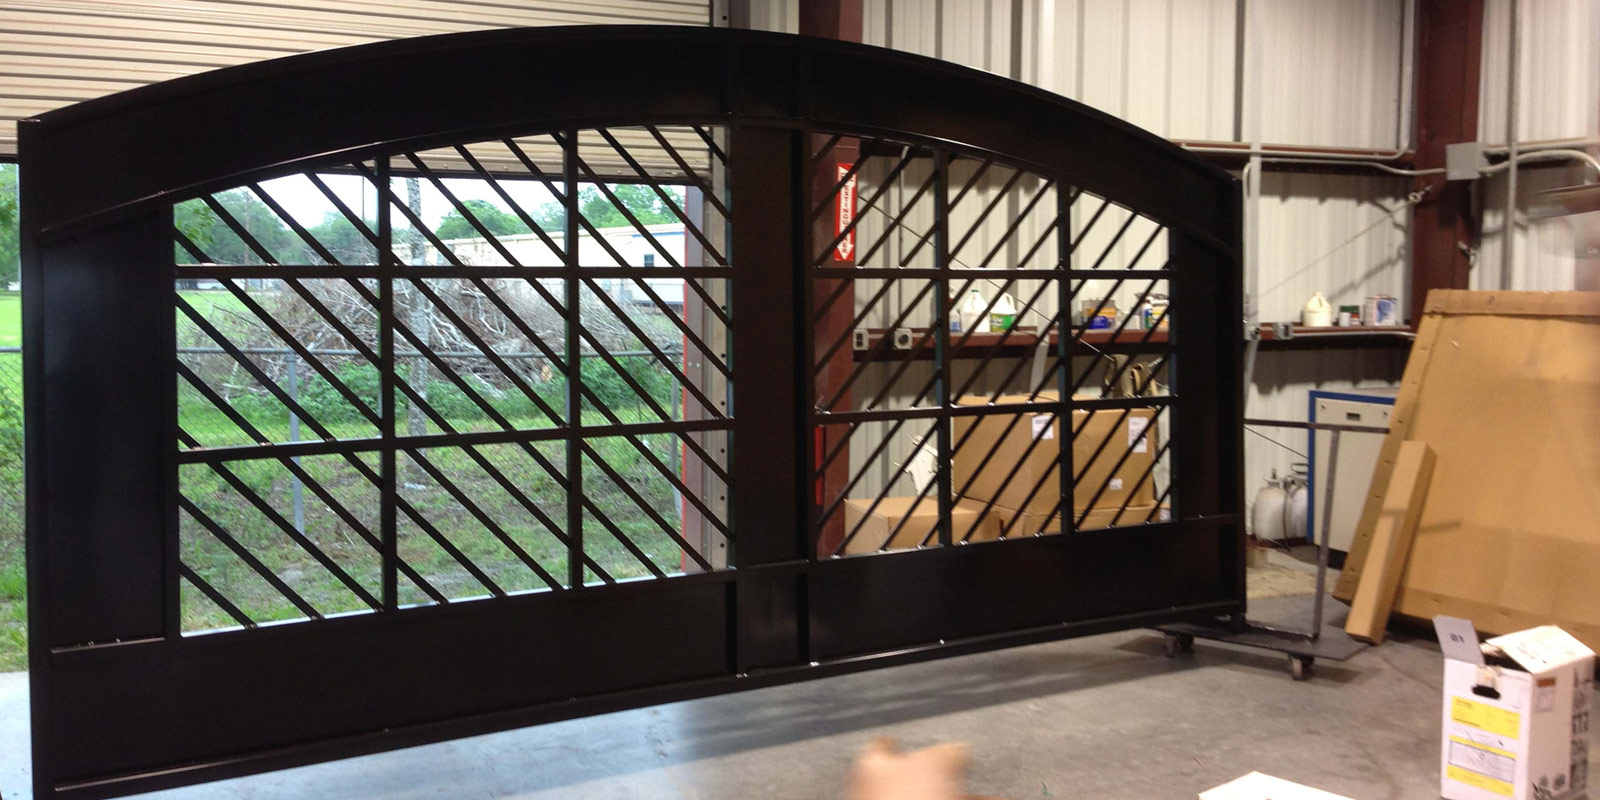 Powder coating provides the best finish possible for your custom entrance gate or fencing project.